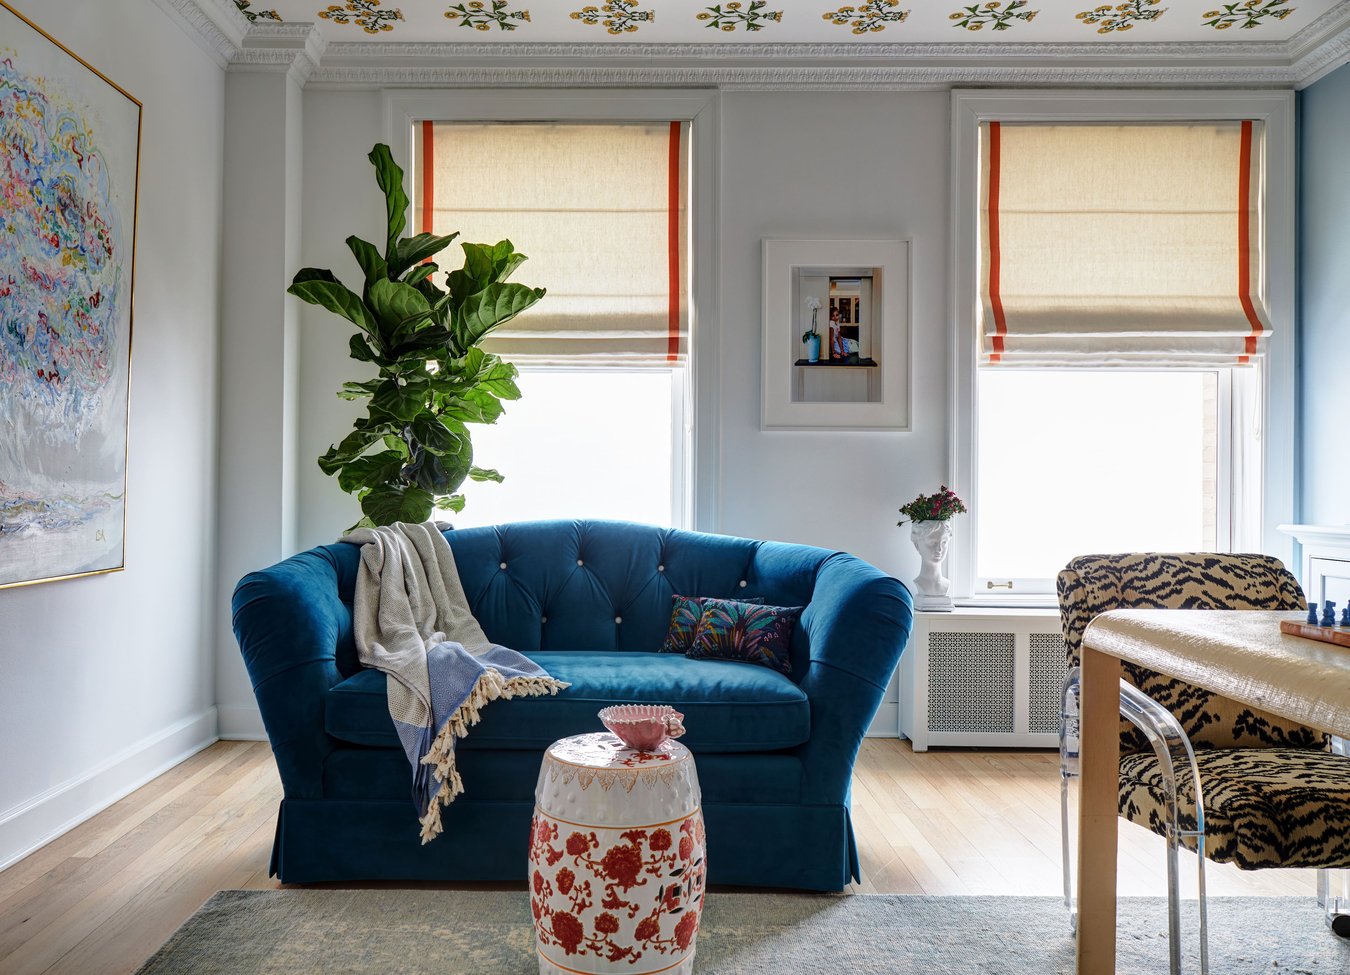 A bright blue plush loveseat in a small apartment with a small antique coffee table in red floral prints - the room is full of natural light, art, and plants - living room design by Jasmin Reese Interiors, Chicago, USA. 